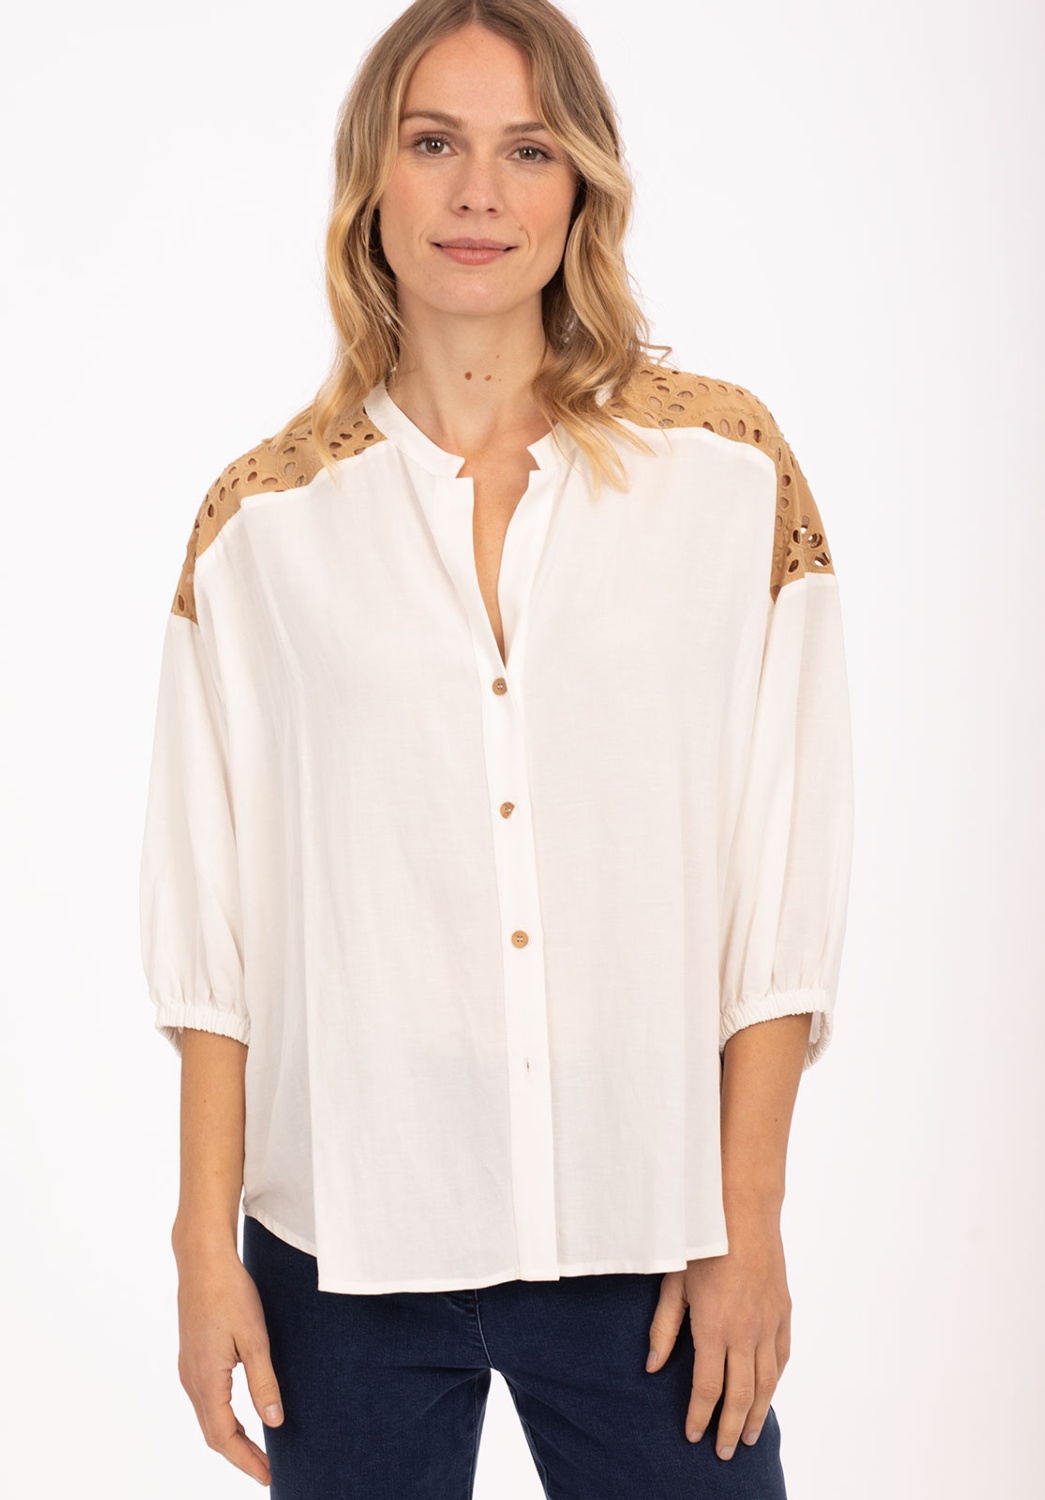 White Blouse With Die-Cut 4